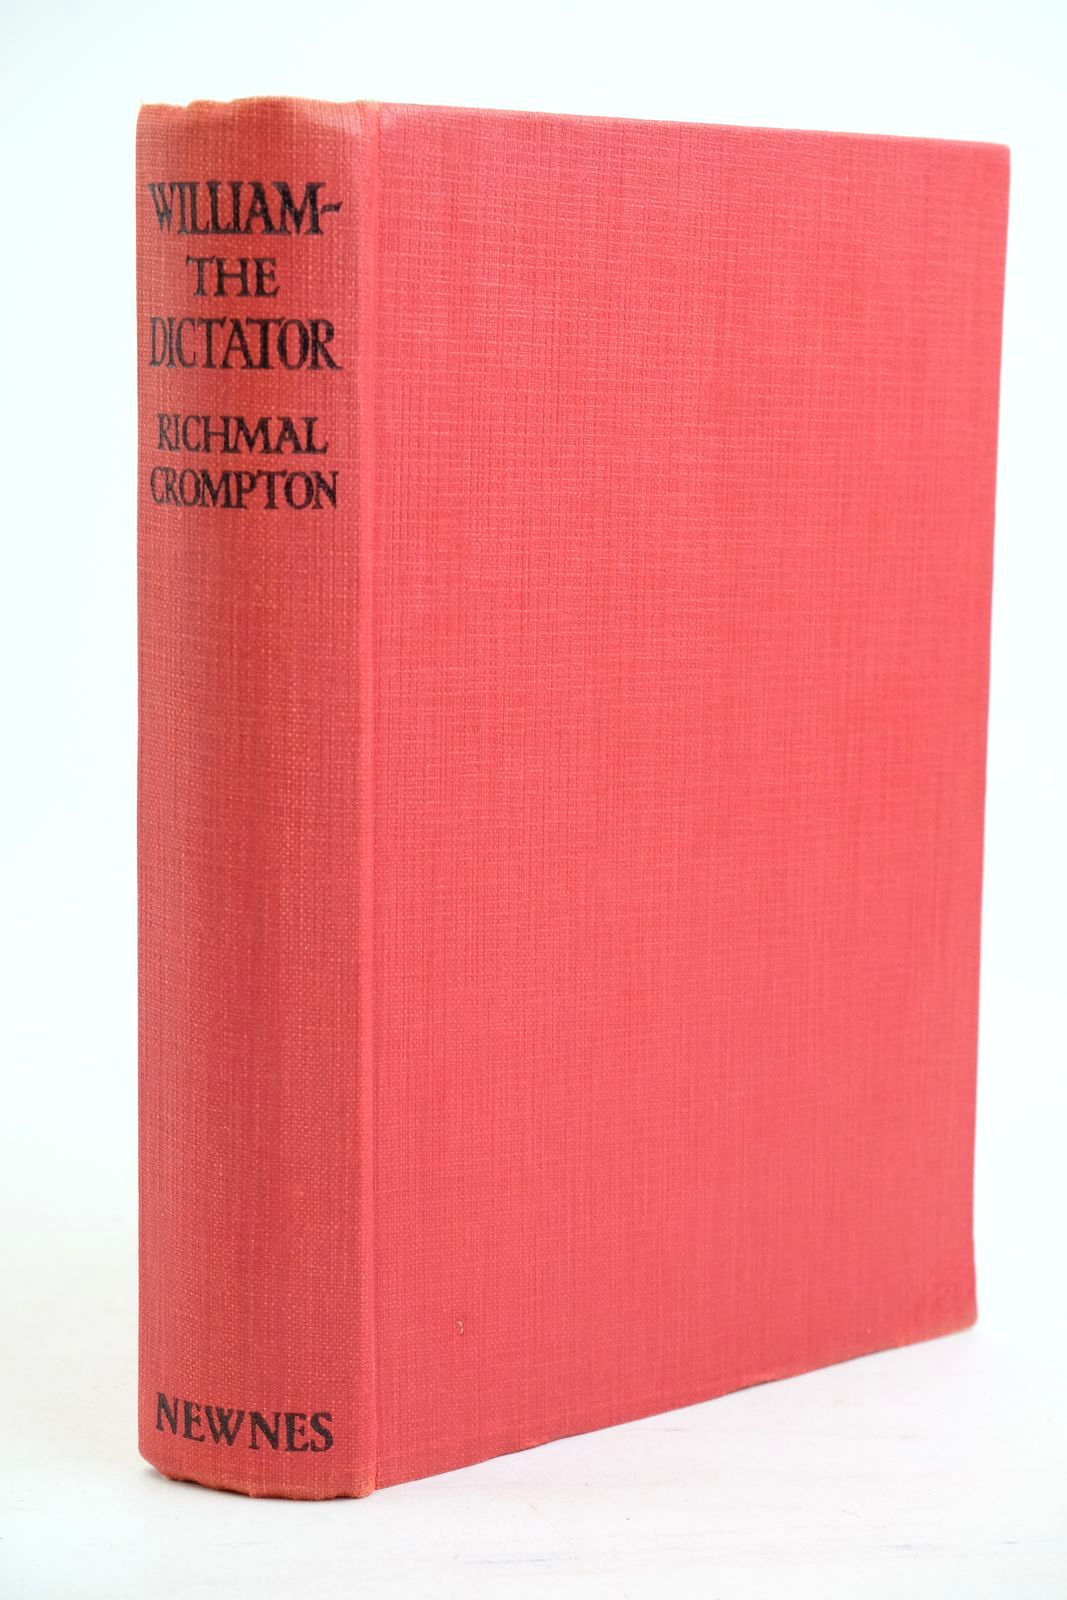 Photo of WILLIAM THE DICTATOR written by Crompton, Richmal illustrated by Henry, Thomas published by George Newnes Limited (STOCK CODE: 1320875)  for sale by Stella & Rose's Books